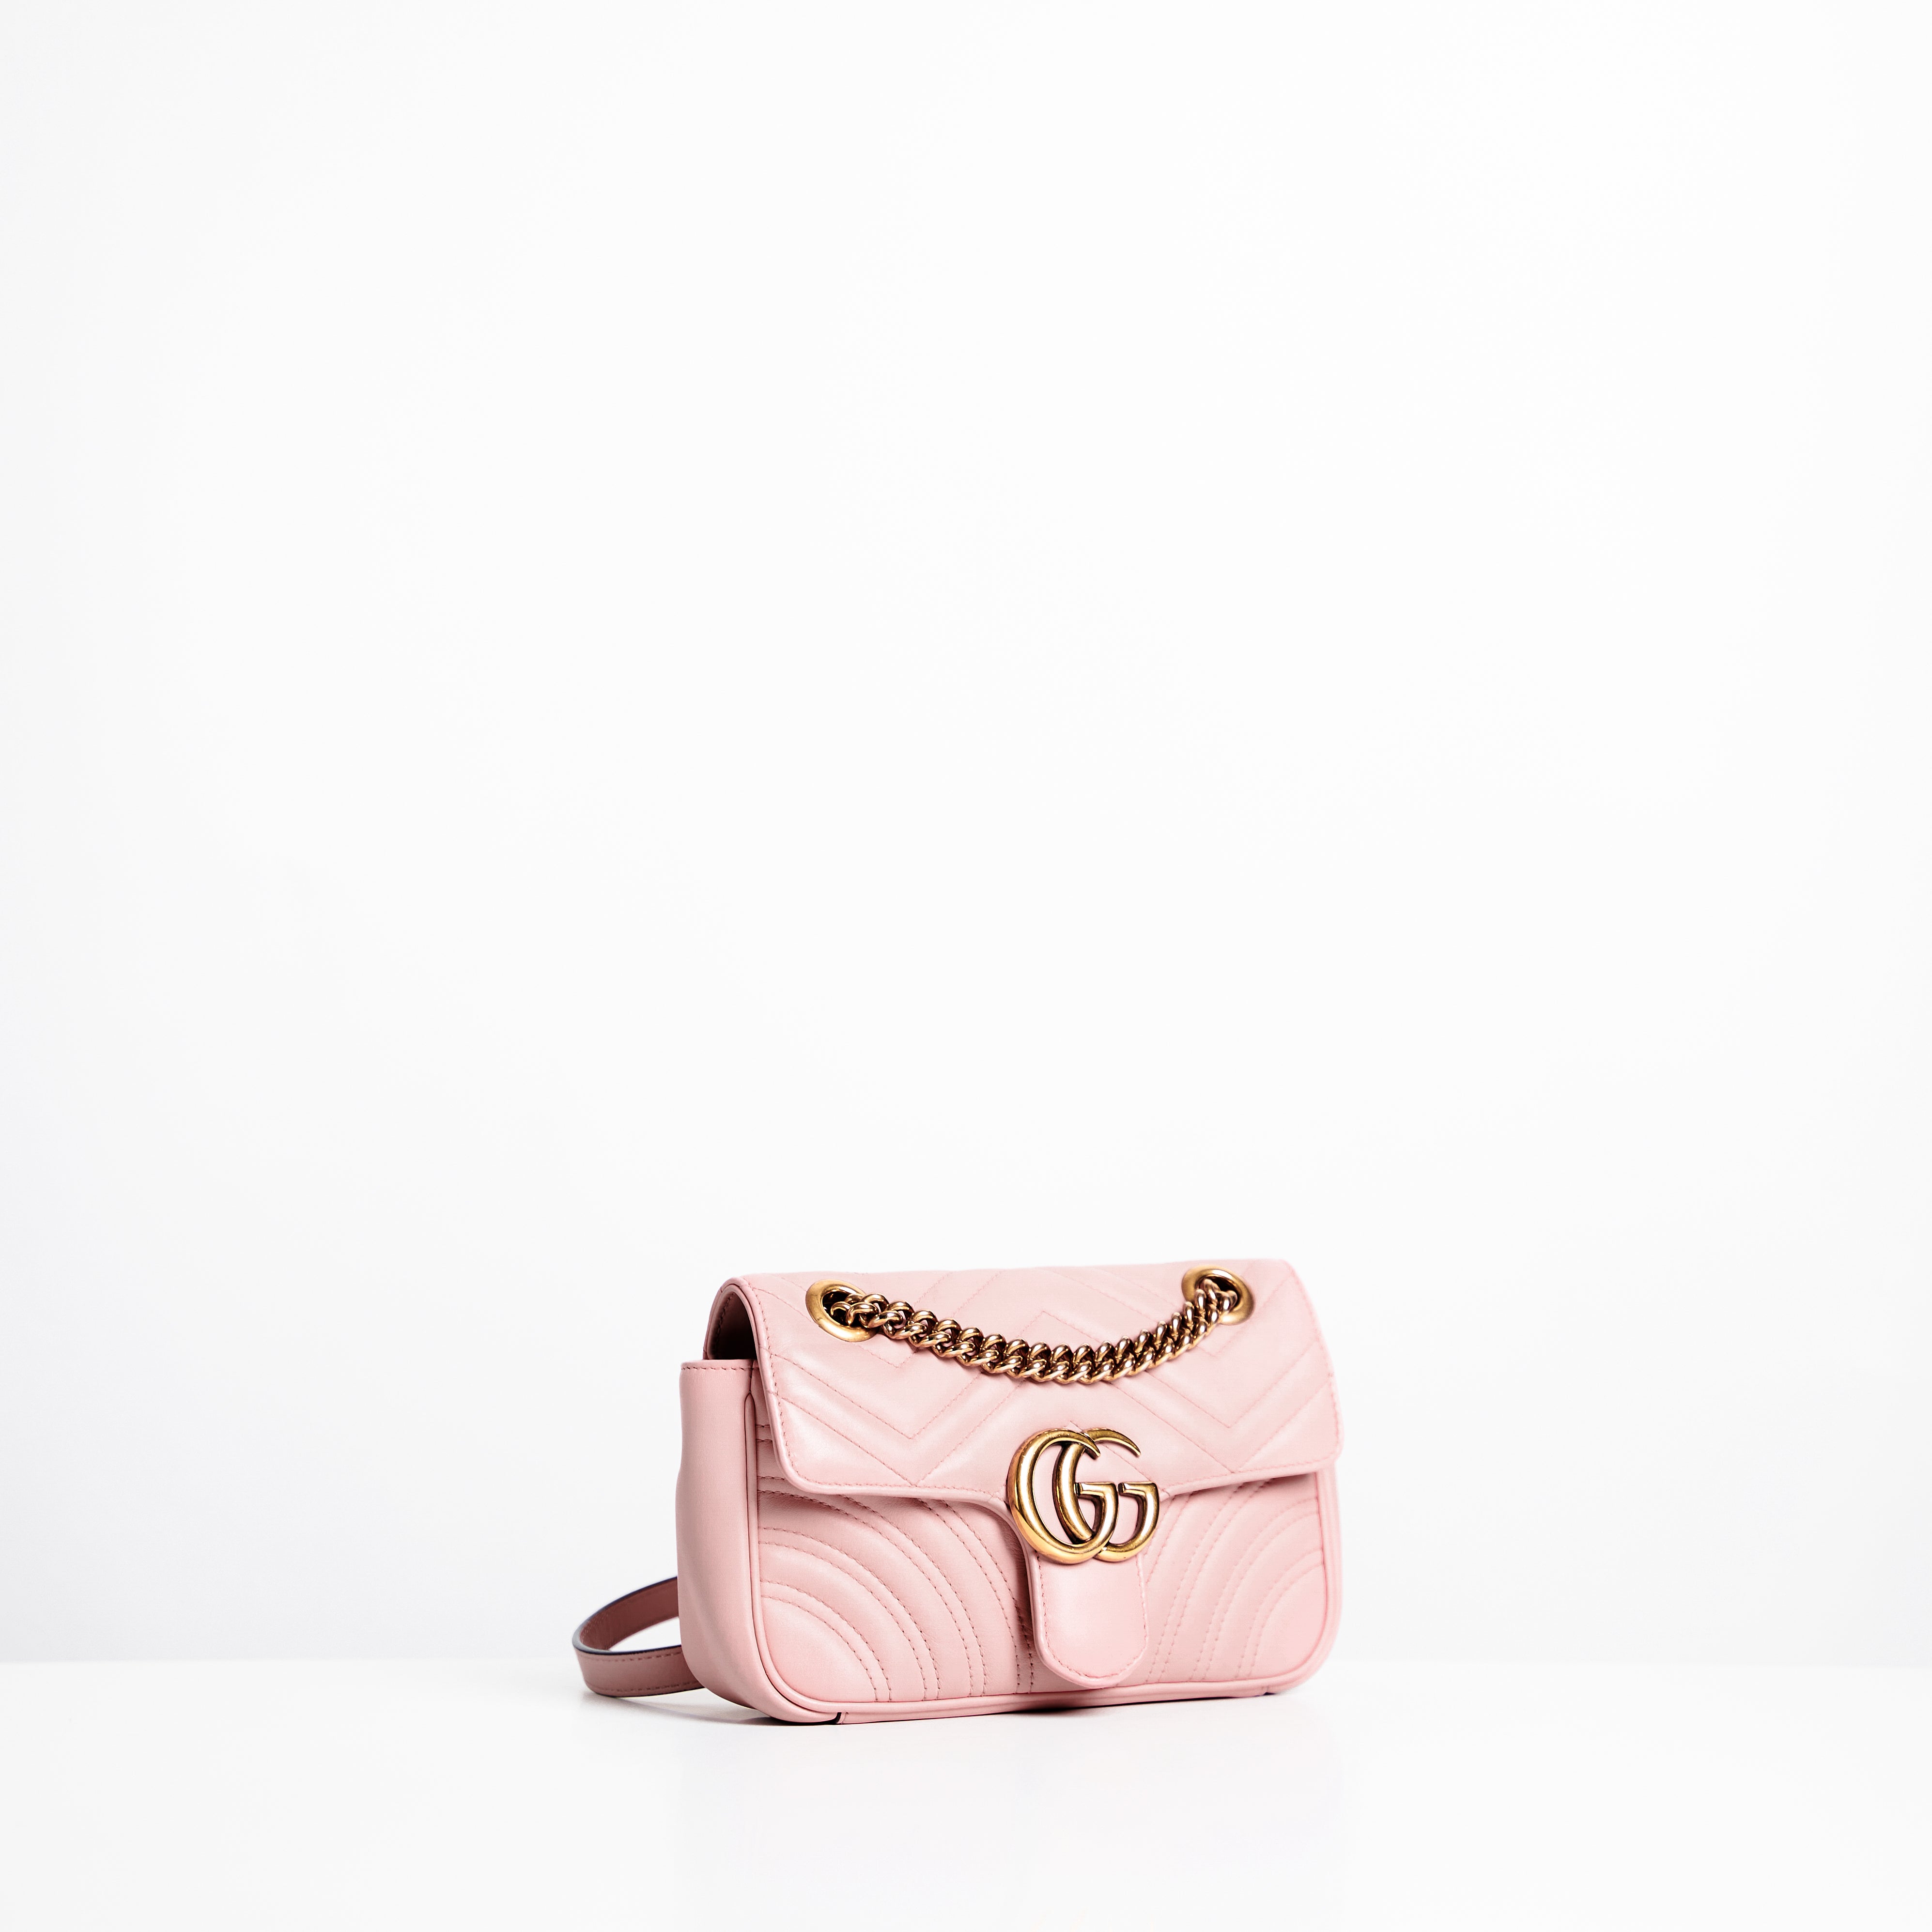 Gucci Marmont Mini in Dusty Pink